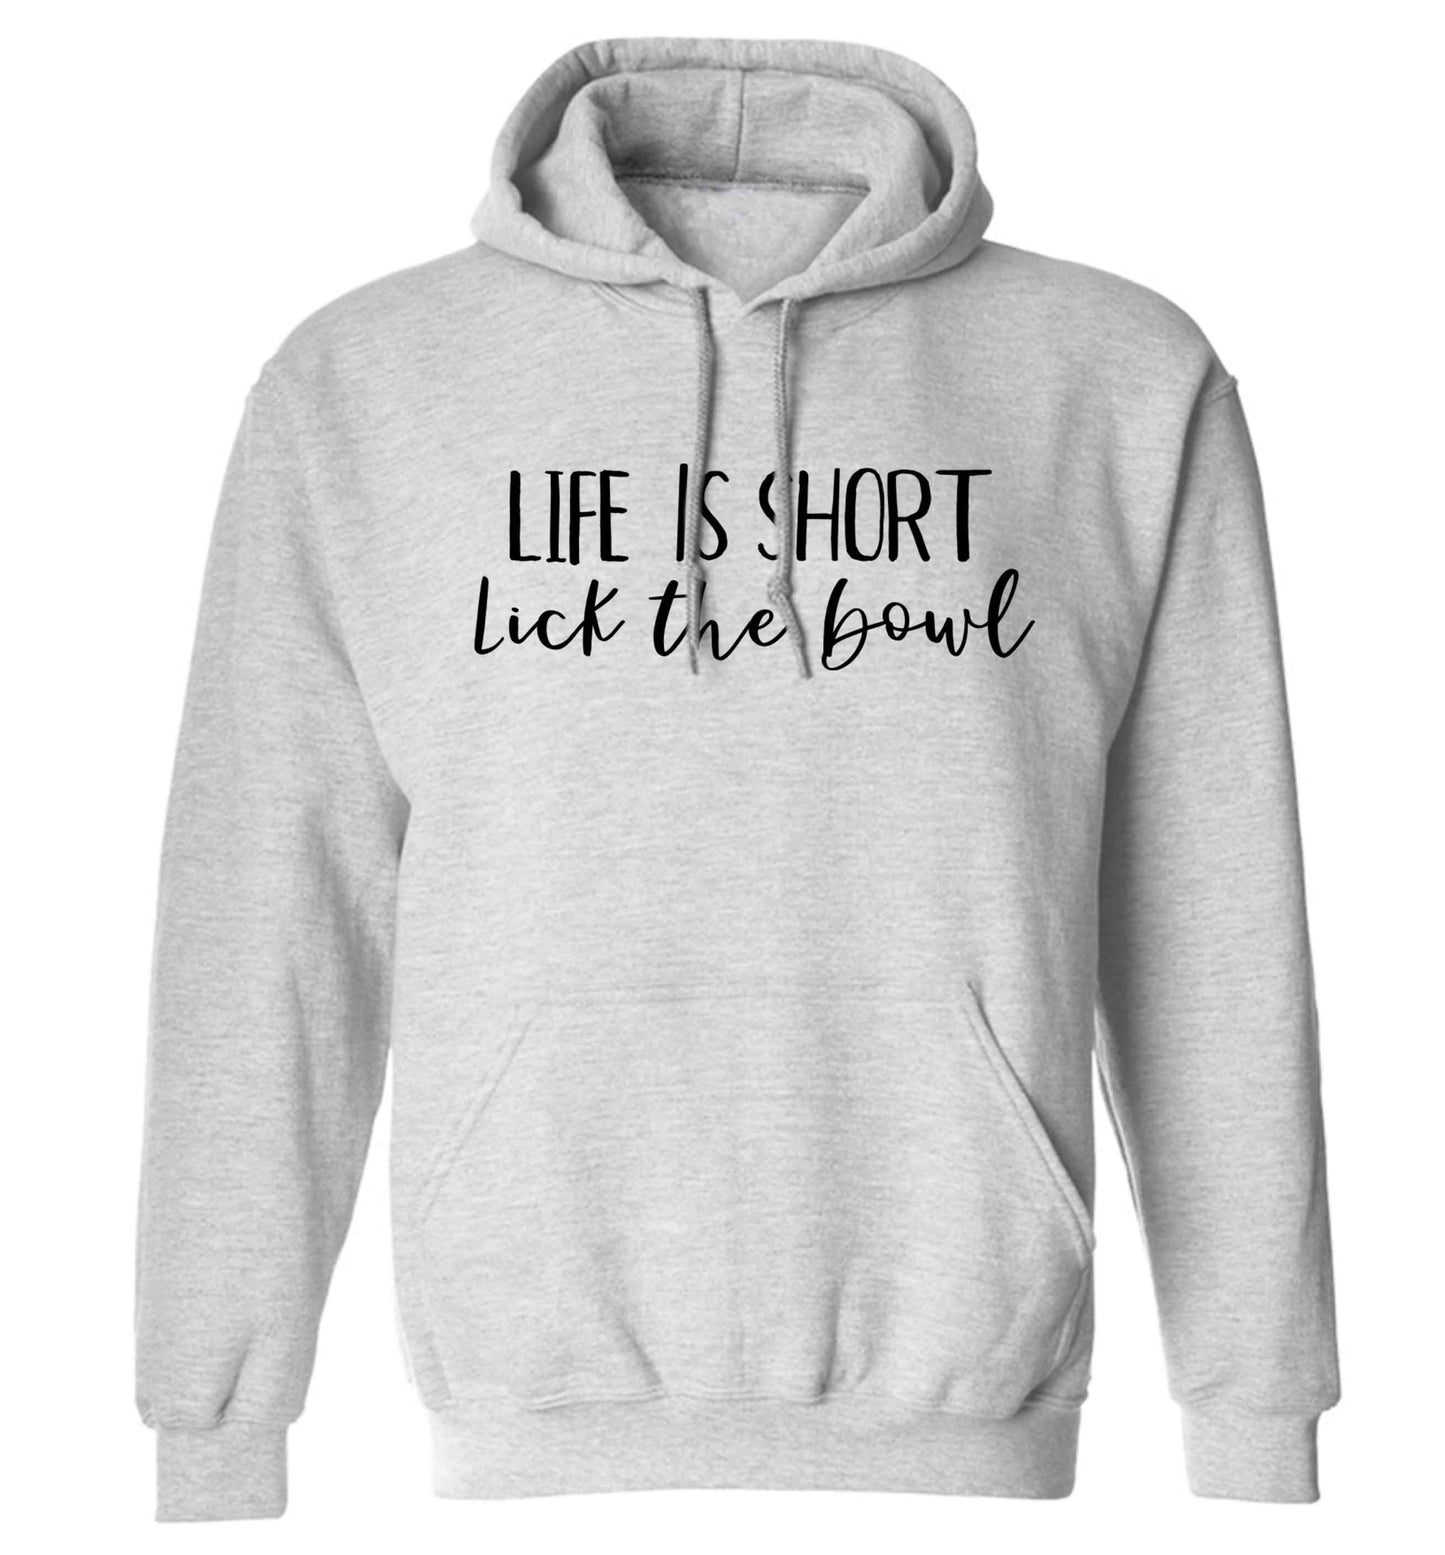 Life is short lick the bowl adults unisex grey hoodie 2XL